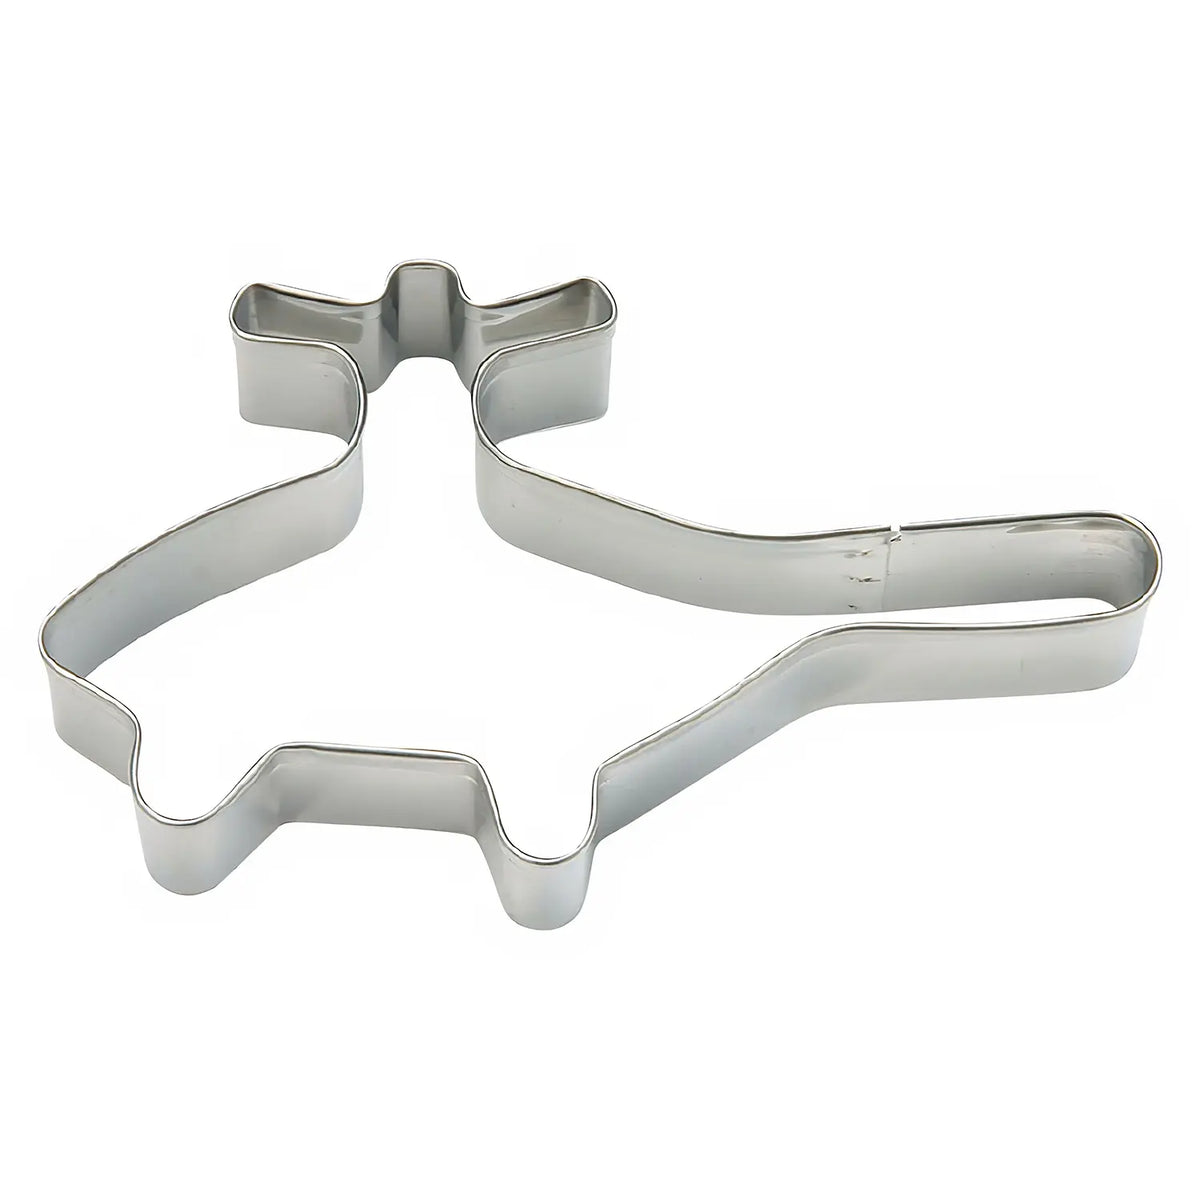 TIGERCROWN Cake Land Stainless Steel Cookie Cutter Helicopter